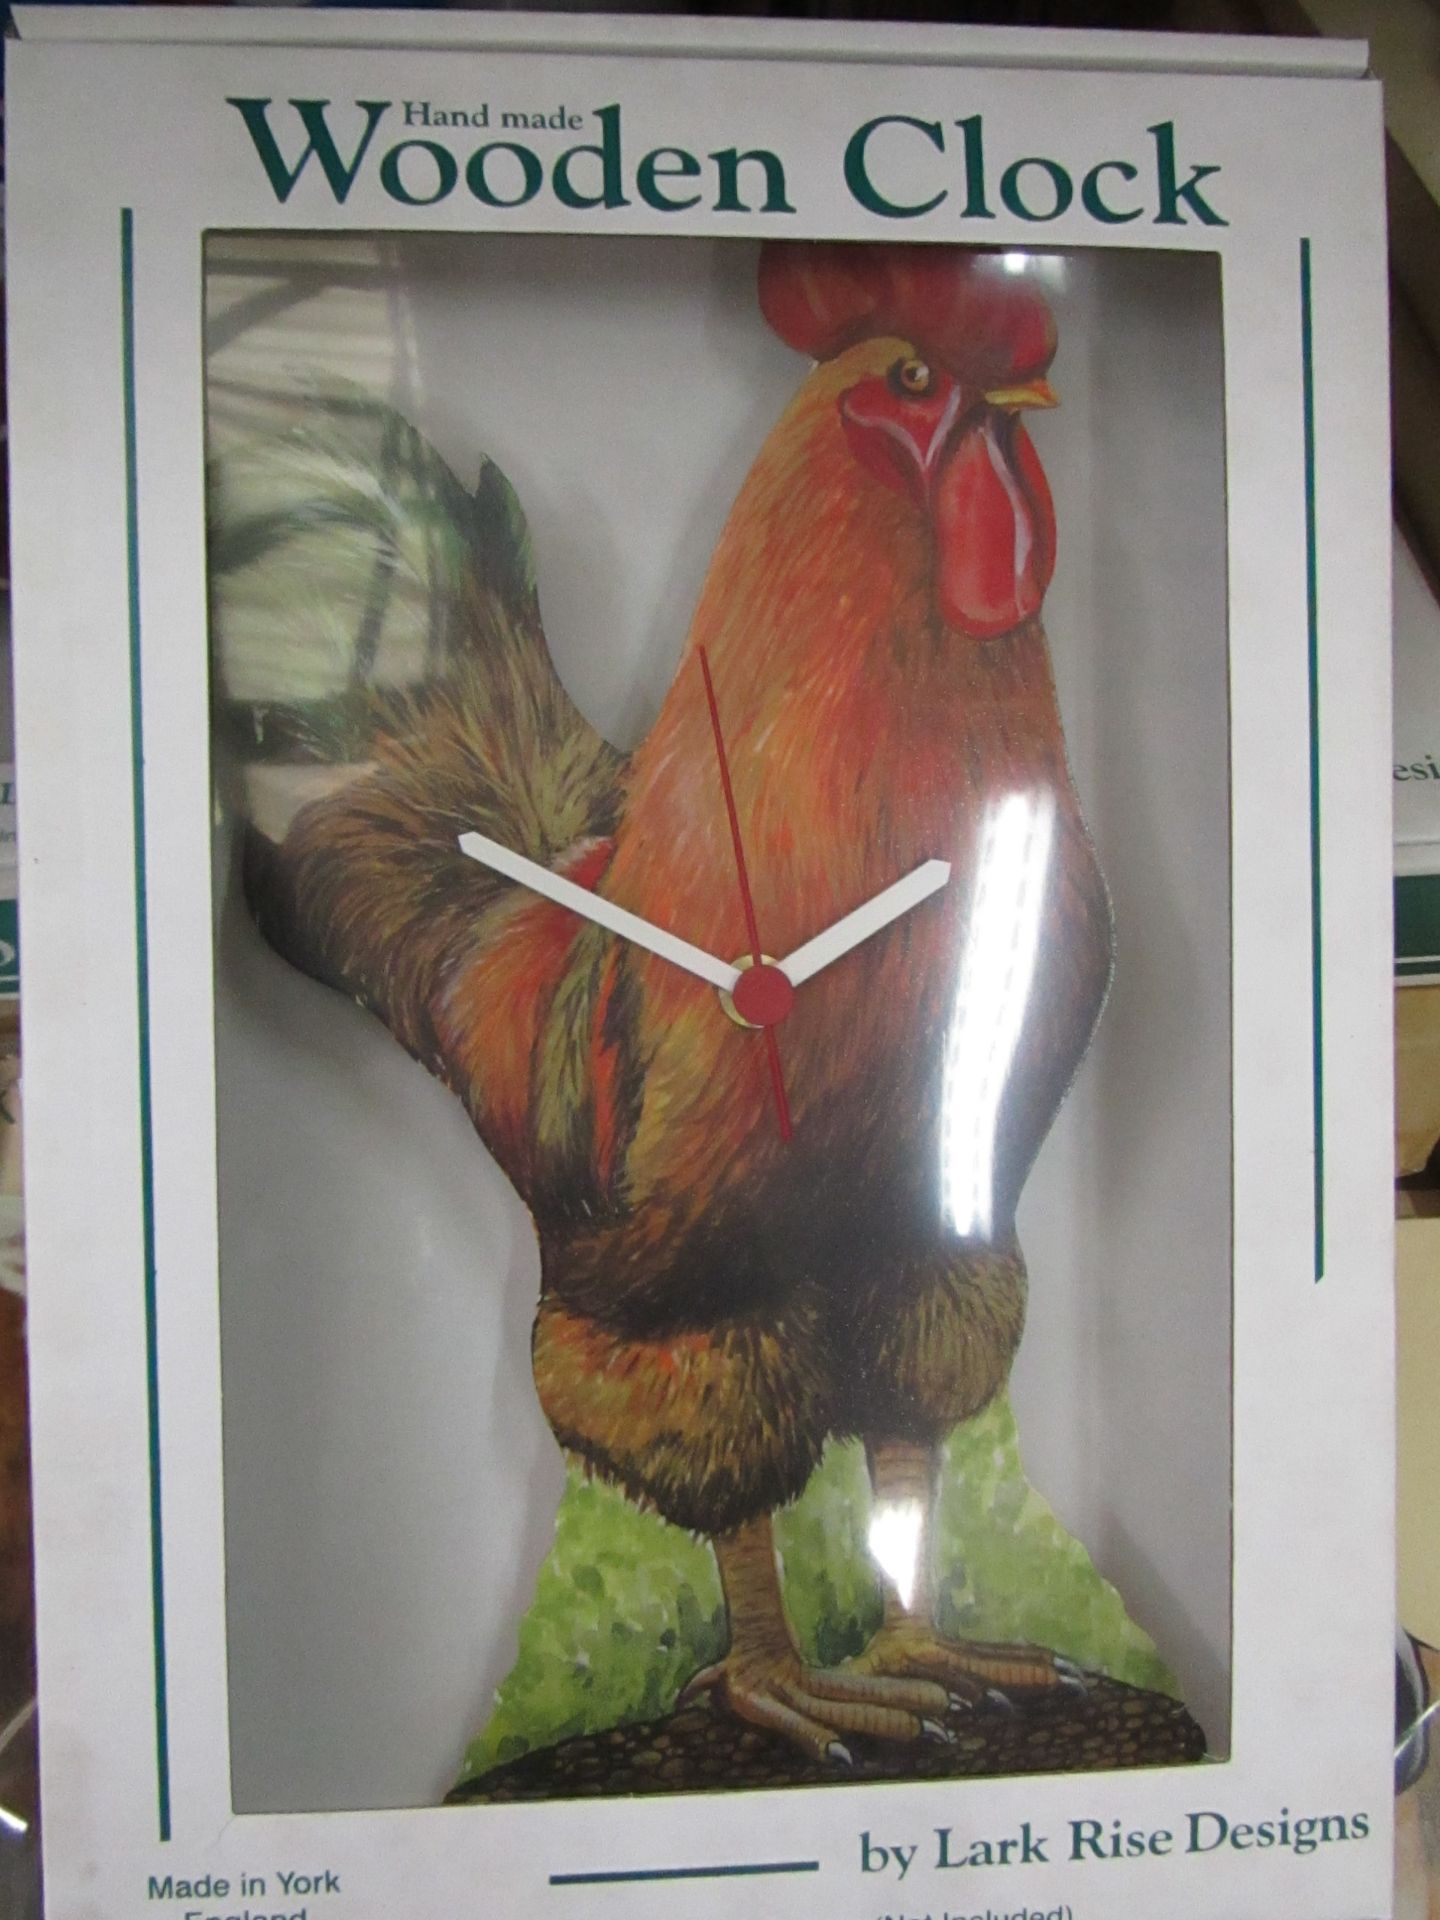 Hand Made Wooden Clock Made By Lark Rise Designs, ( see Picture for design ) Requires 1 X AA Battery